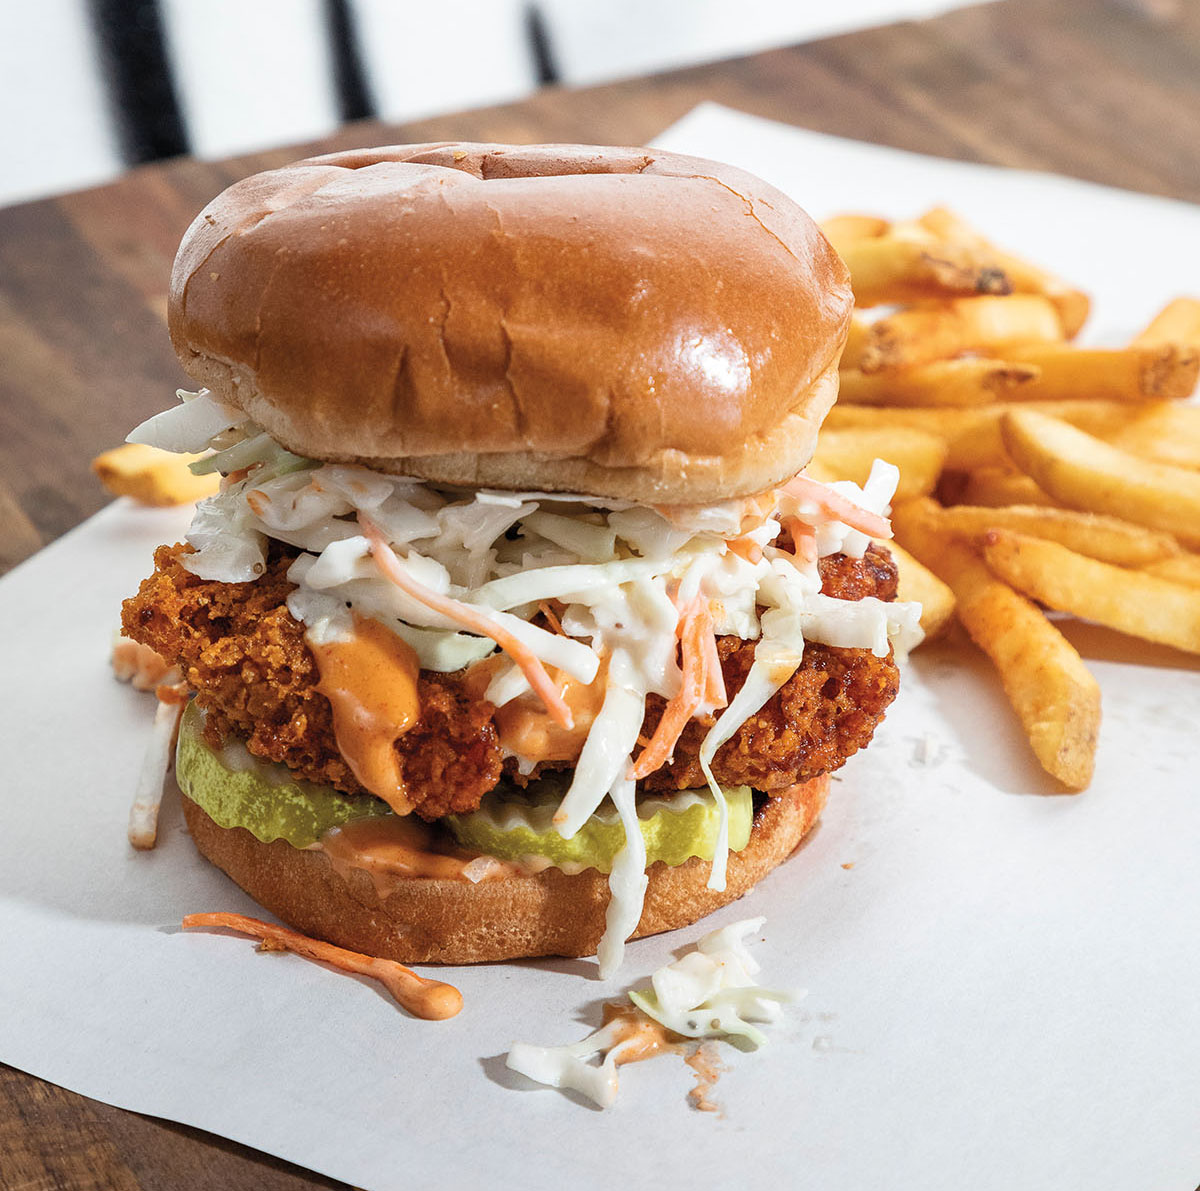 A vegan chicken sandwich topped with coleslaw on a Brioche bun served with a pile of golden French fries